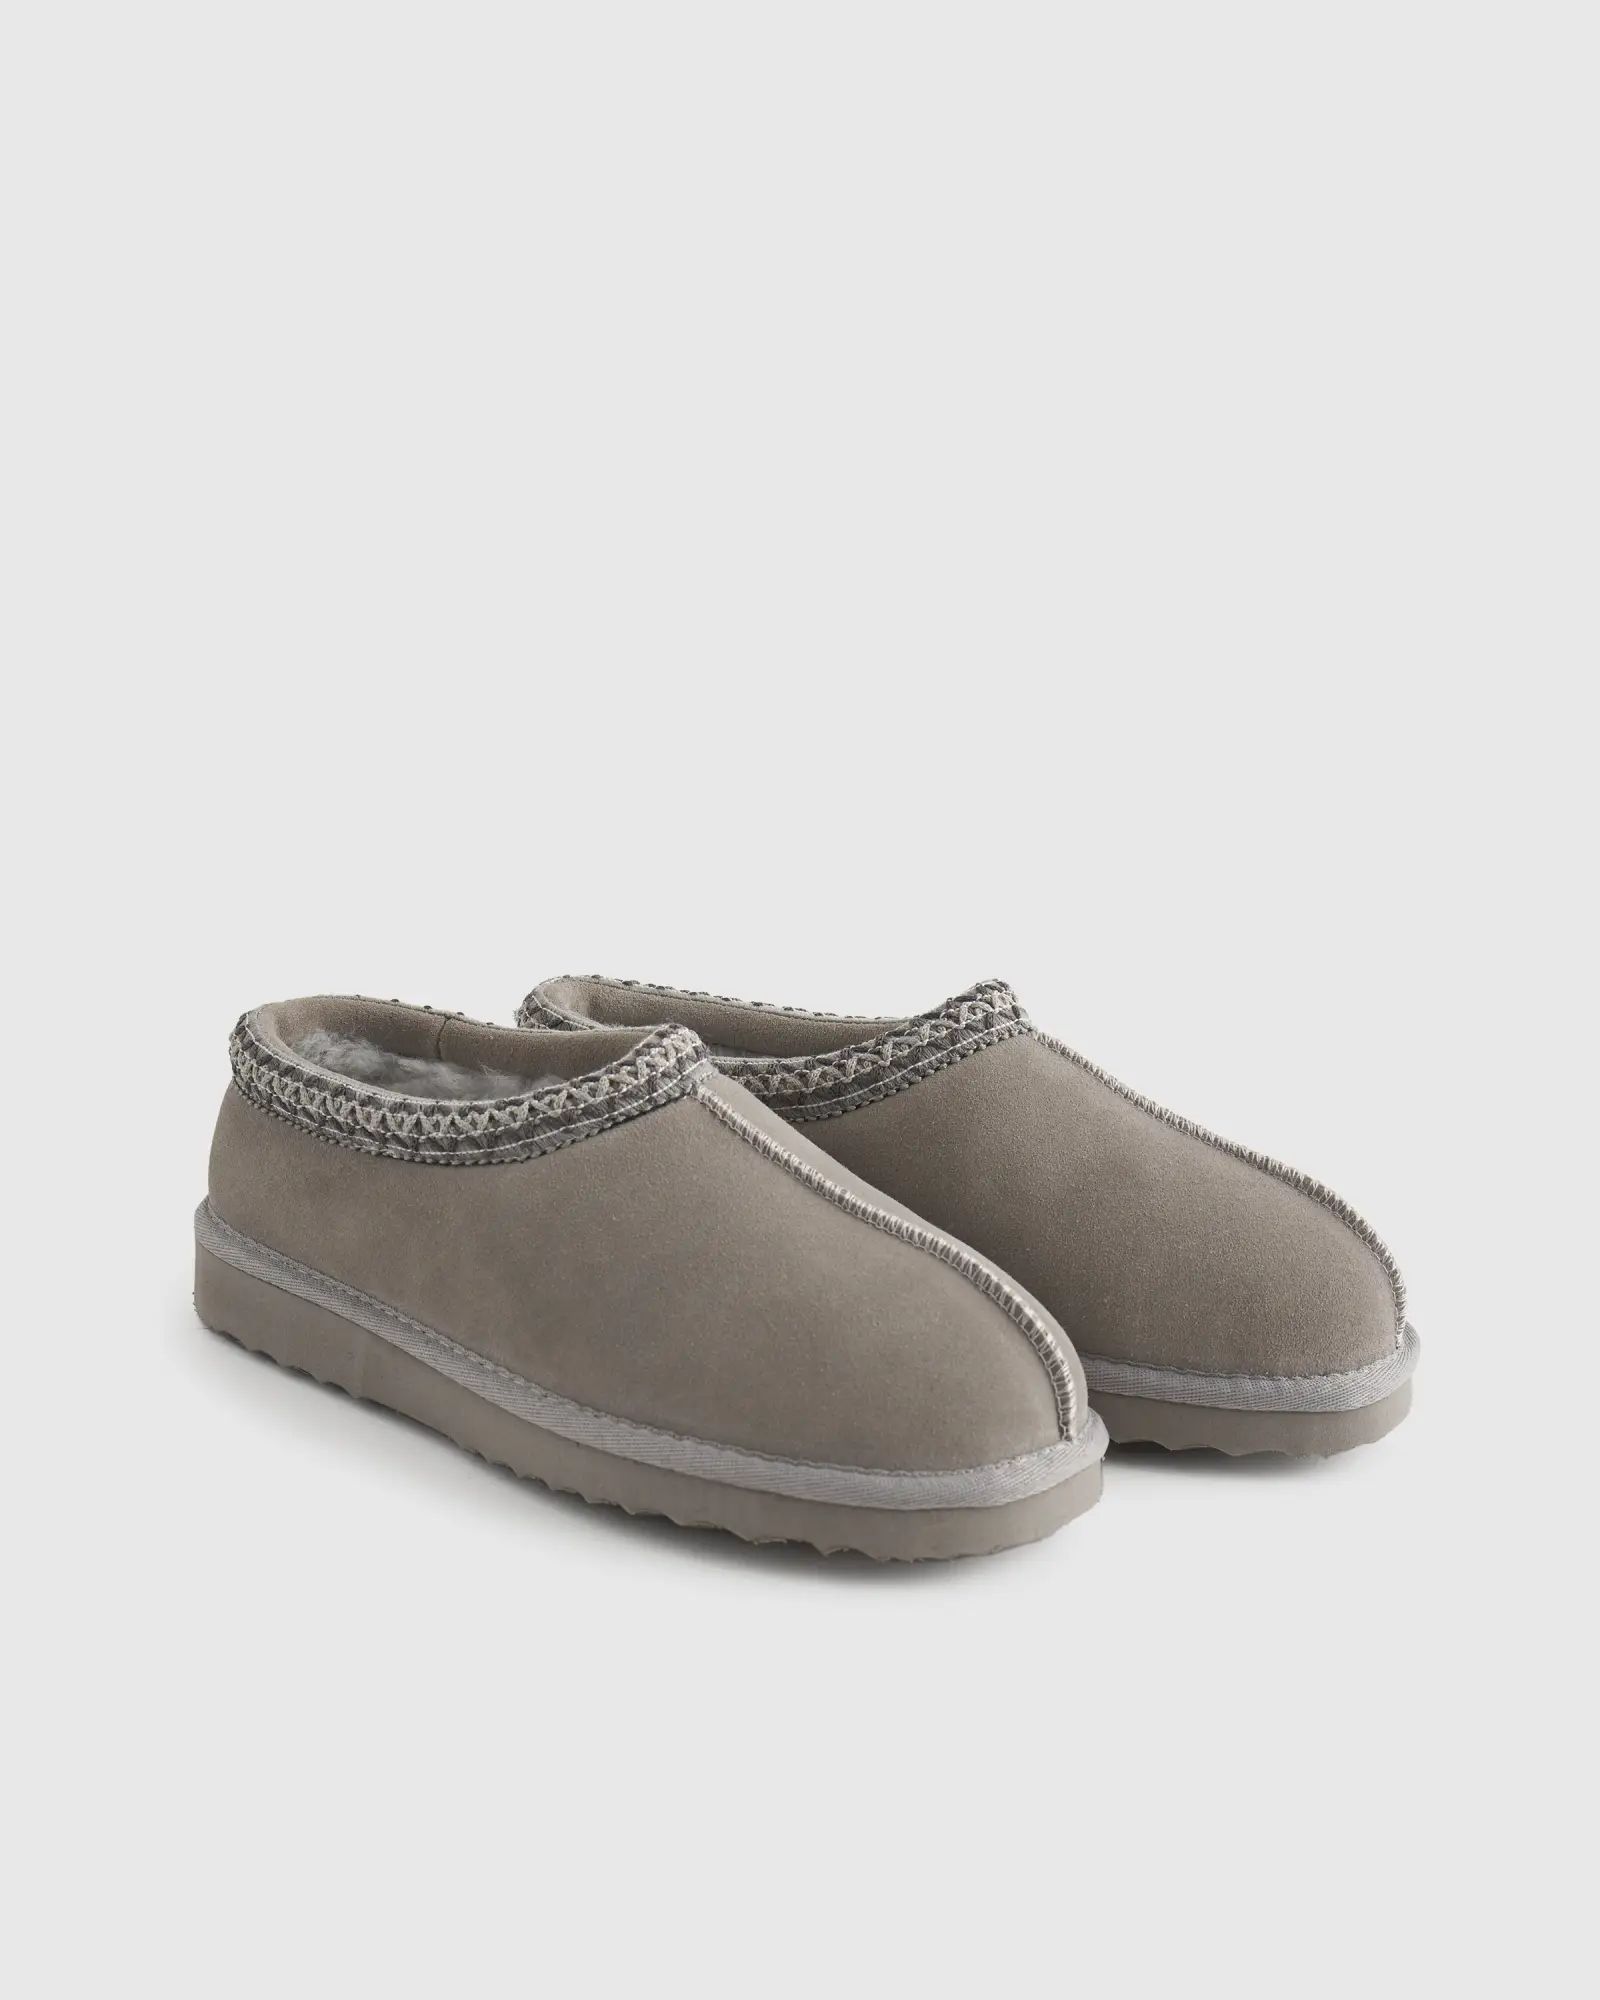 Australian Shearling Clog Slippers | Quince